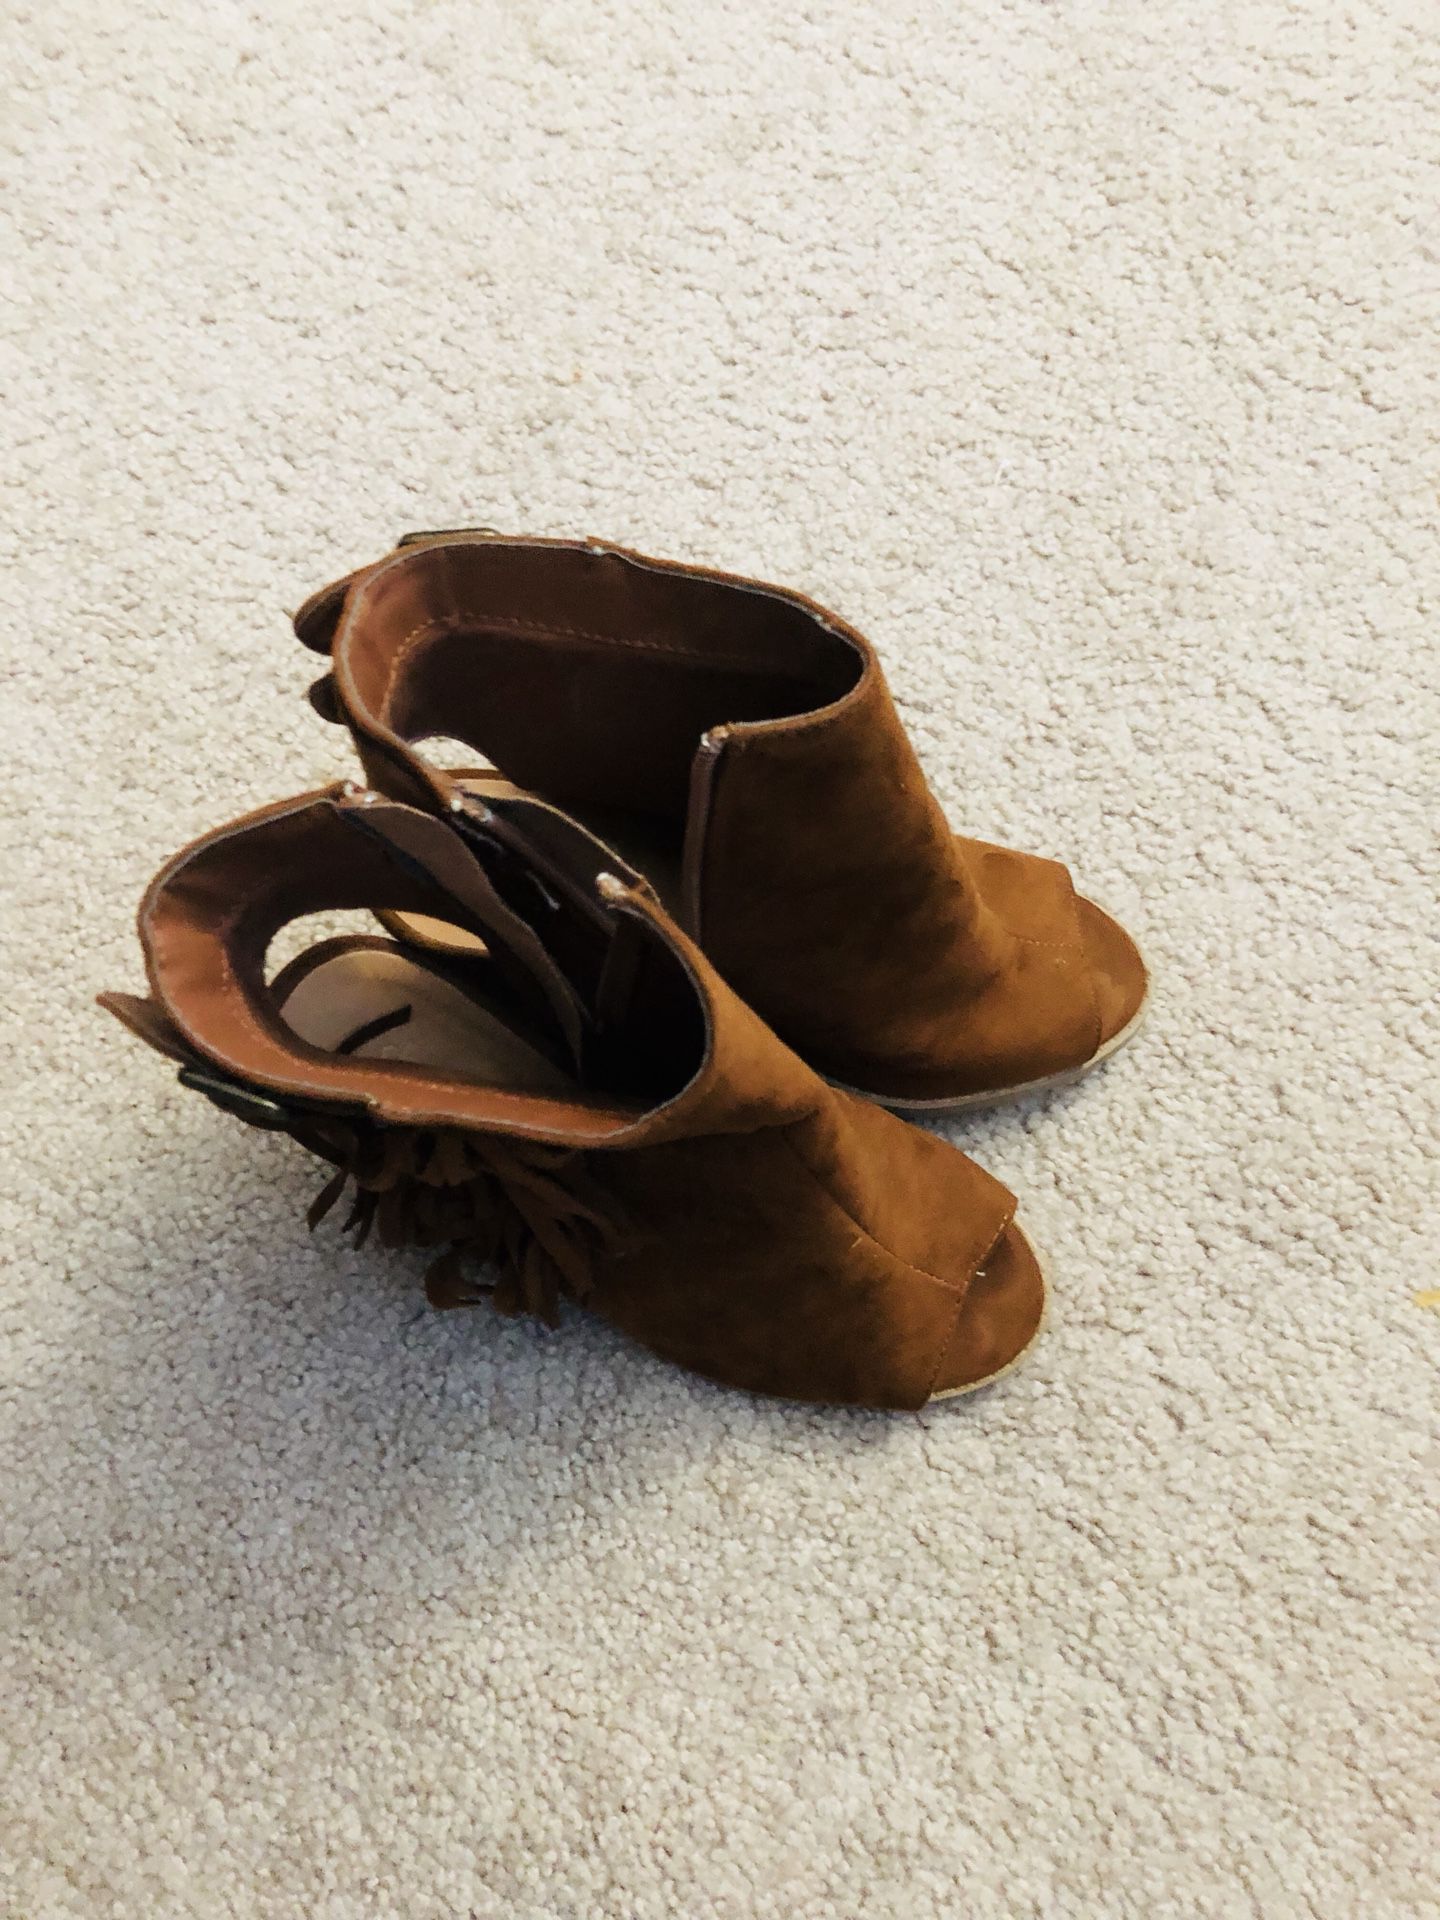 Size 6 brown suede booties